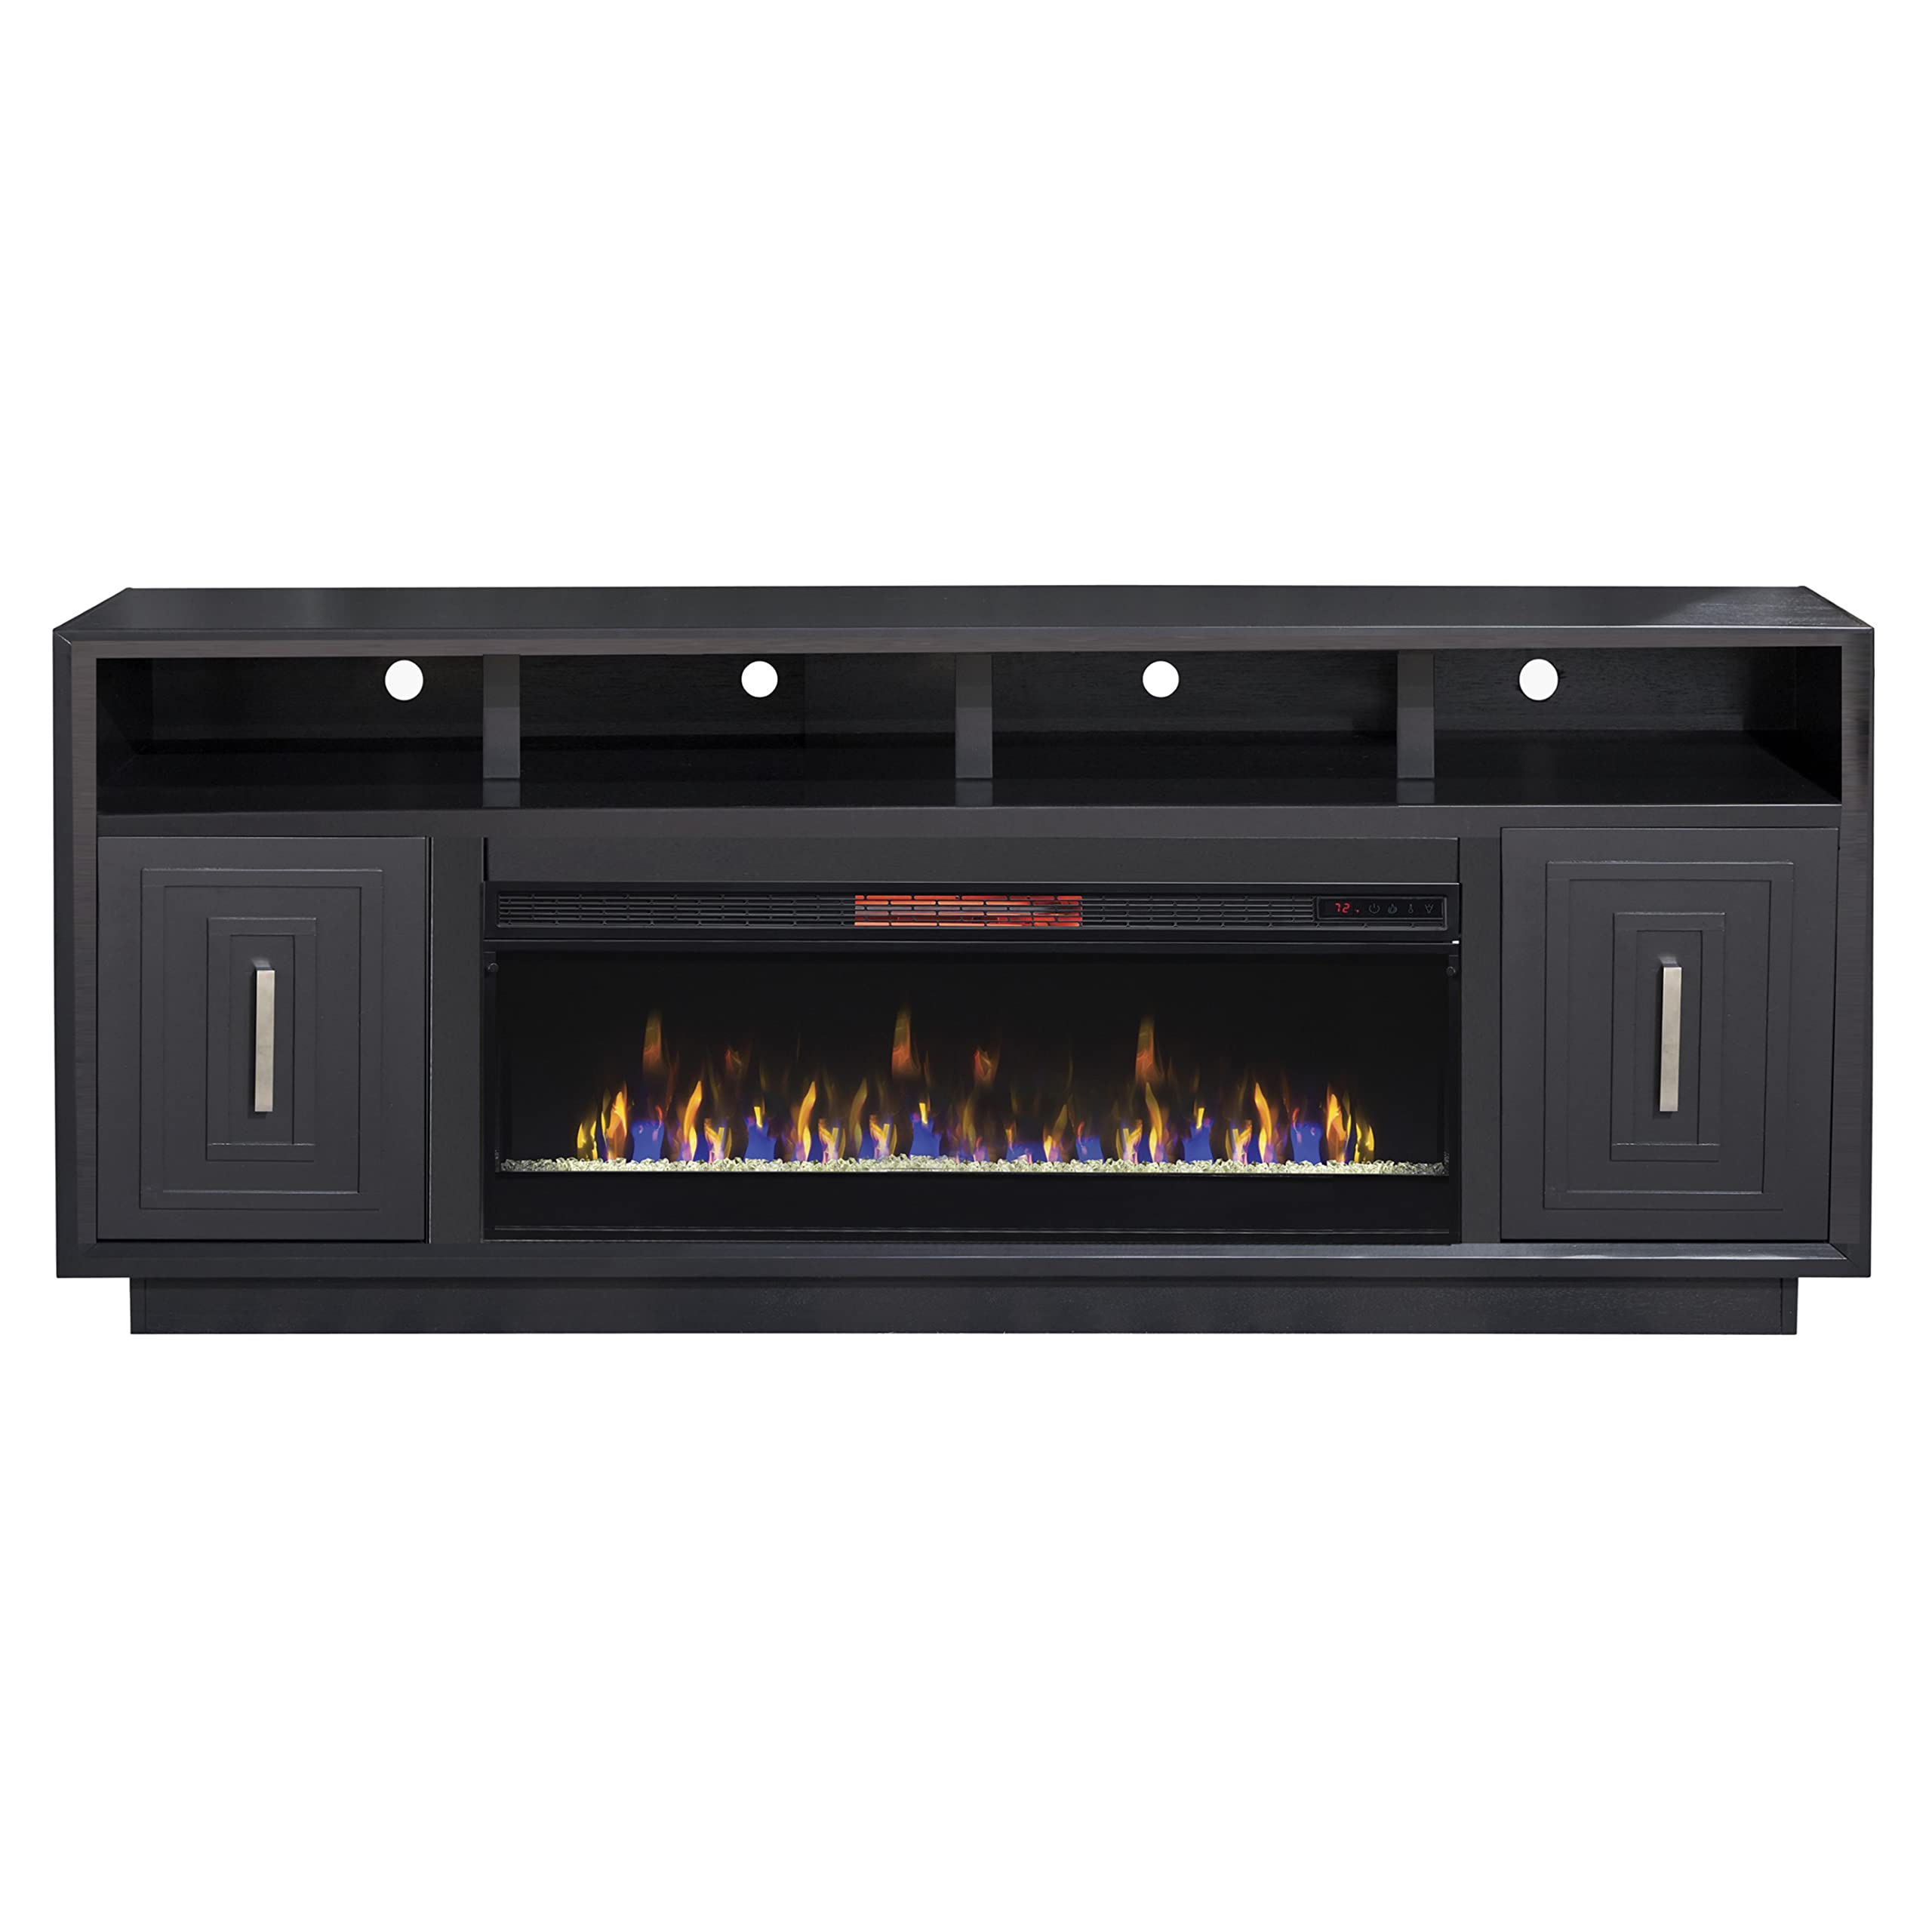 Bridgevine Home Sunset Fireplace TV Stand 83 inches, Accommodates TVs up to 95 inches, Fully Assembled, Poplar Solid Wood, Black Finish